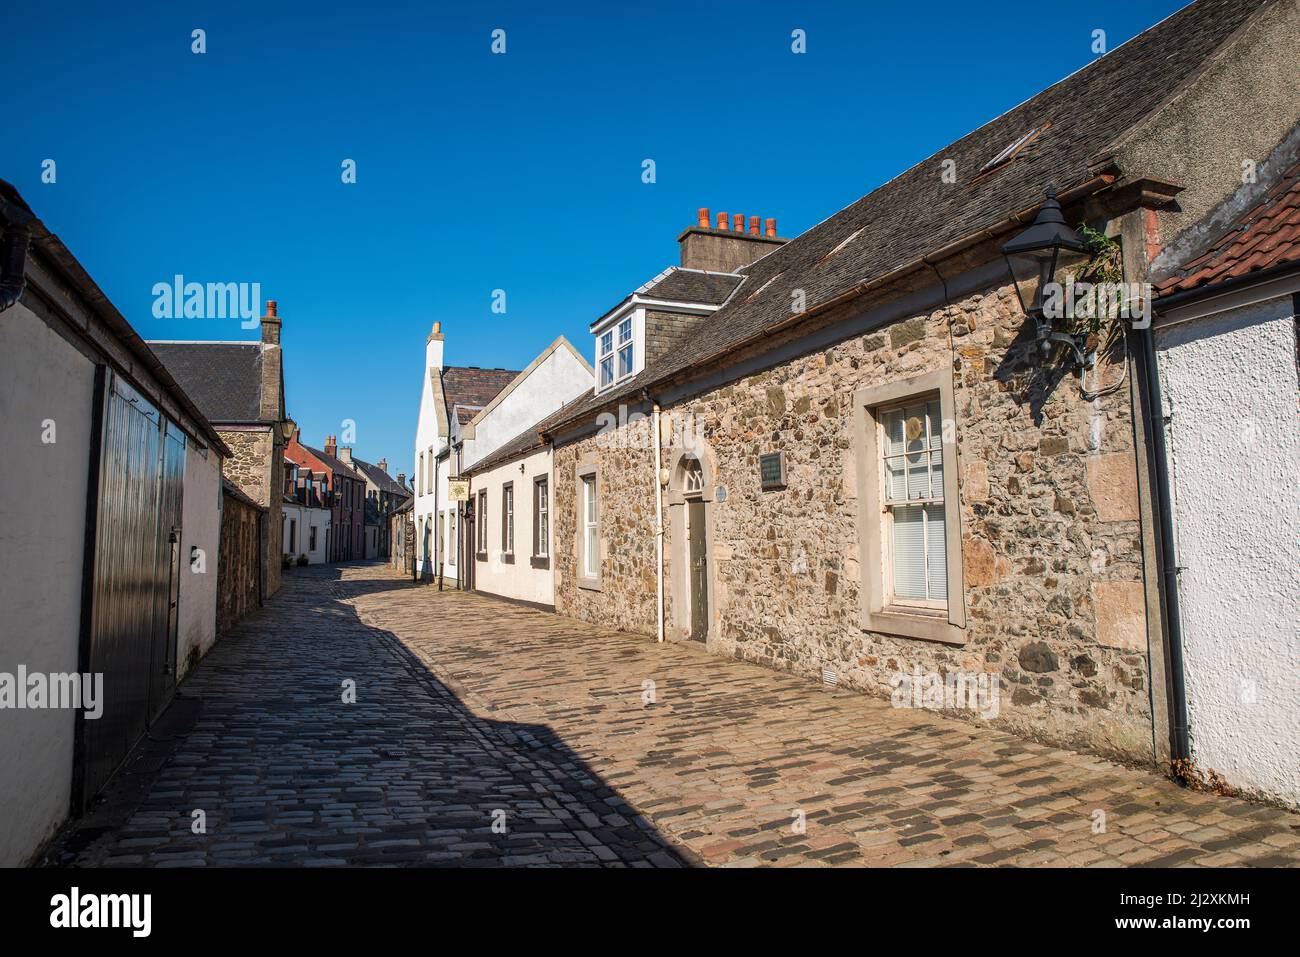 A view of the Glasgow Vennel associated with Robert Burns at Irvine in North Ayrshire, Scotland. Stock Photo